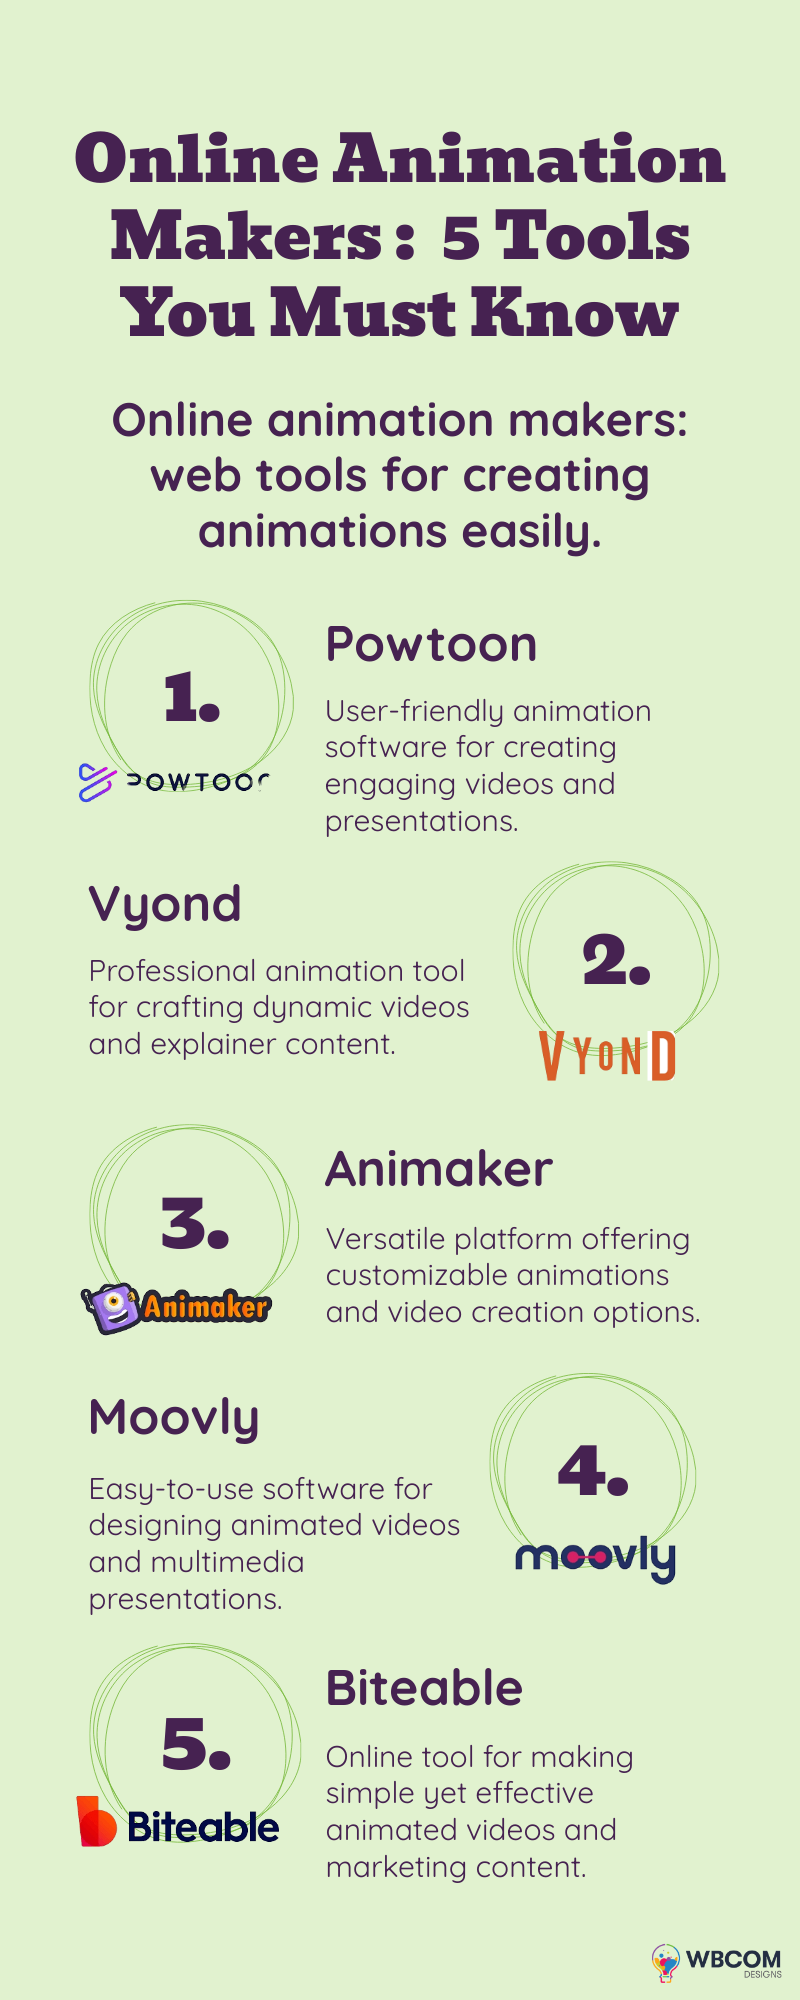 Online Animation Makers